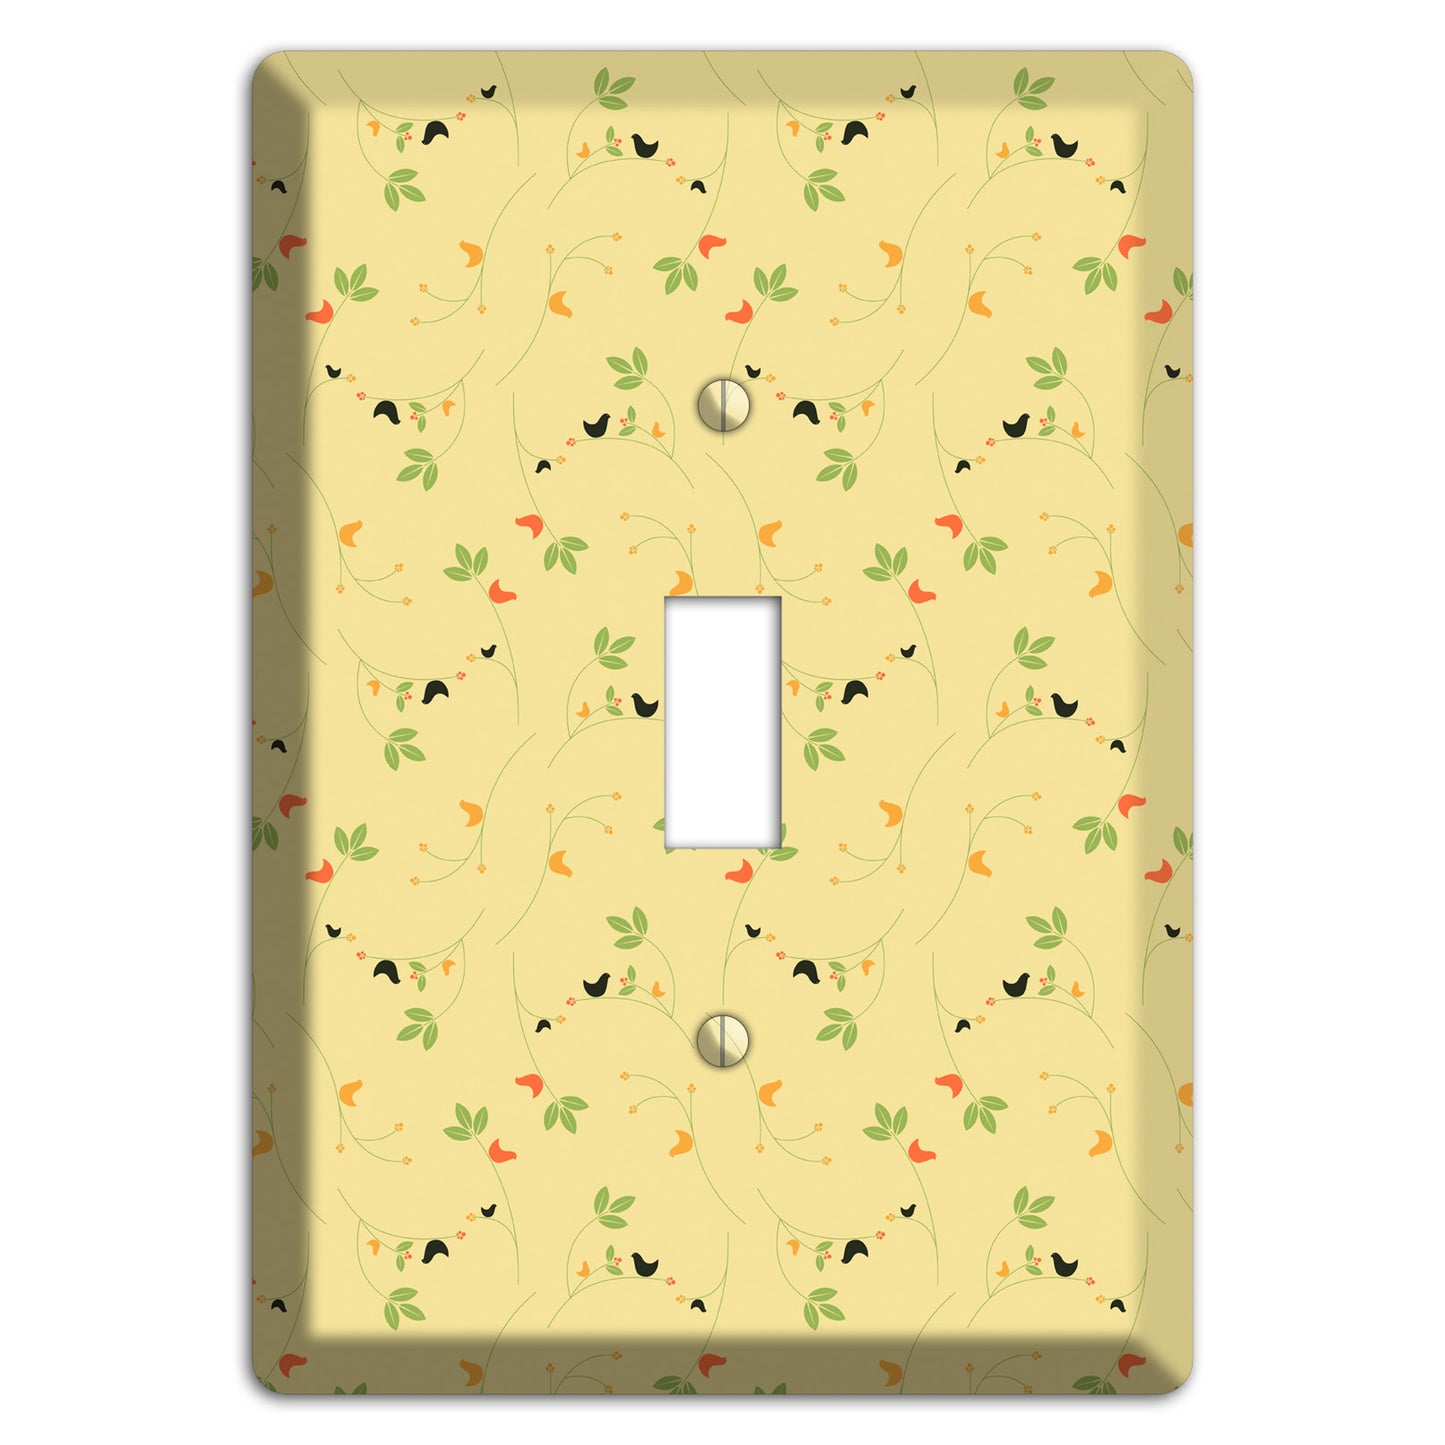 Tiny Yellow Flowers Cover Plates